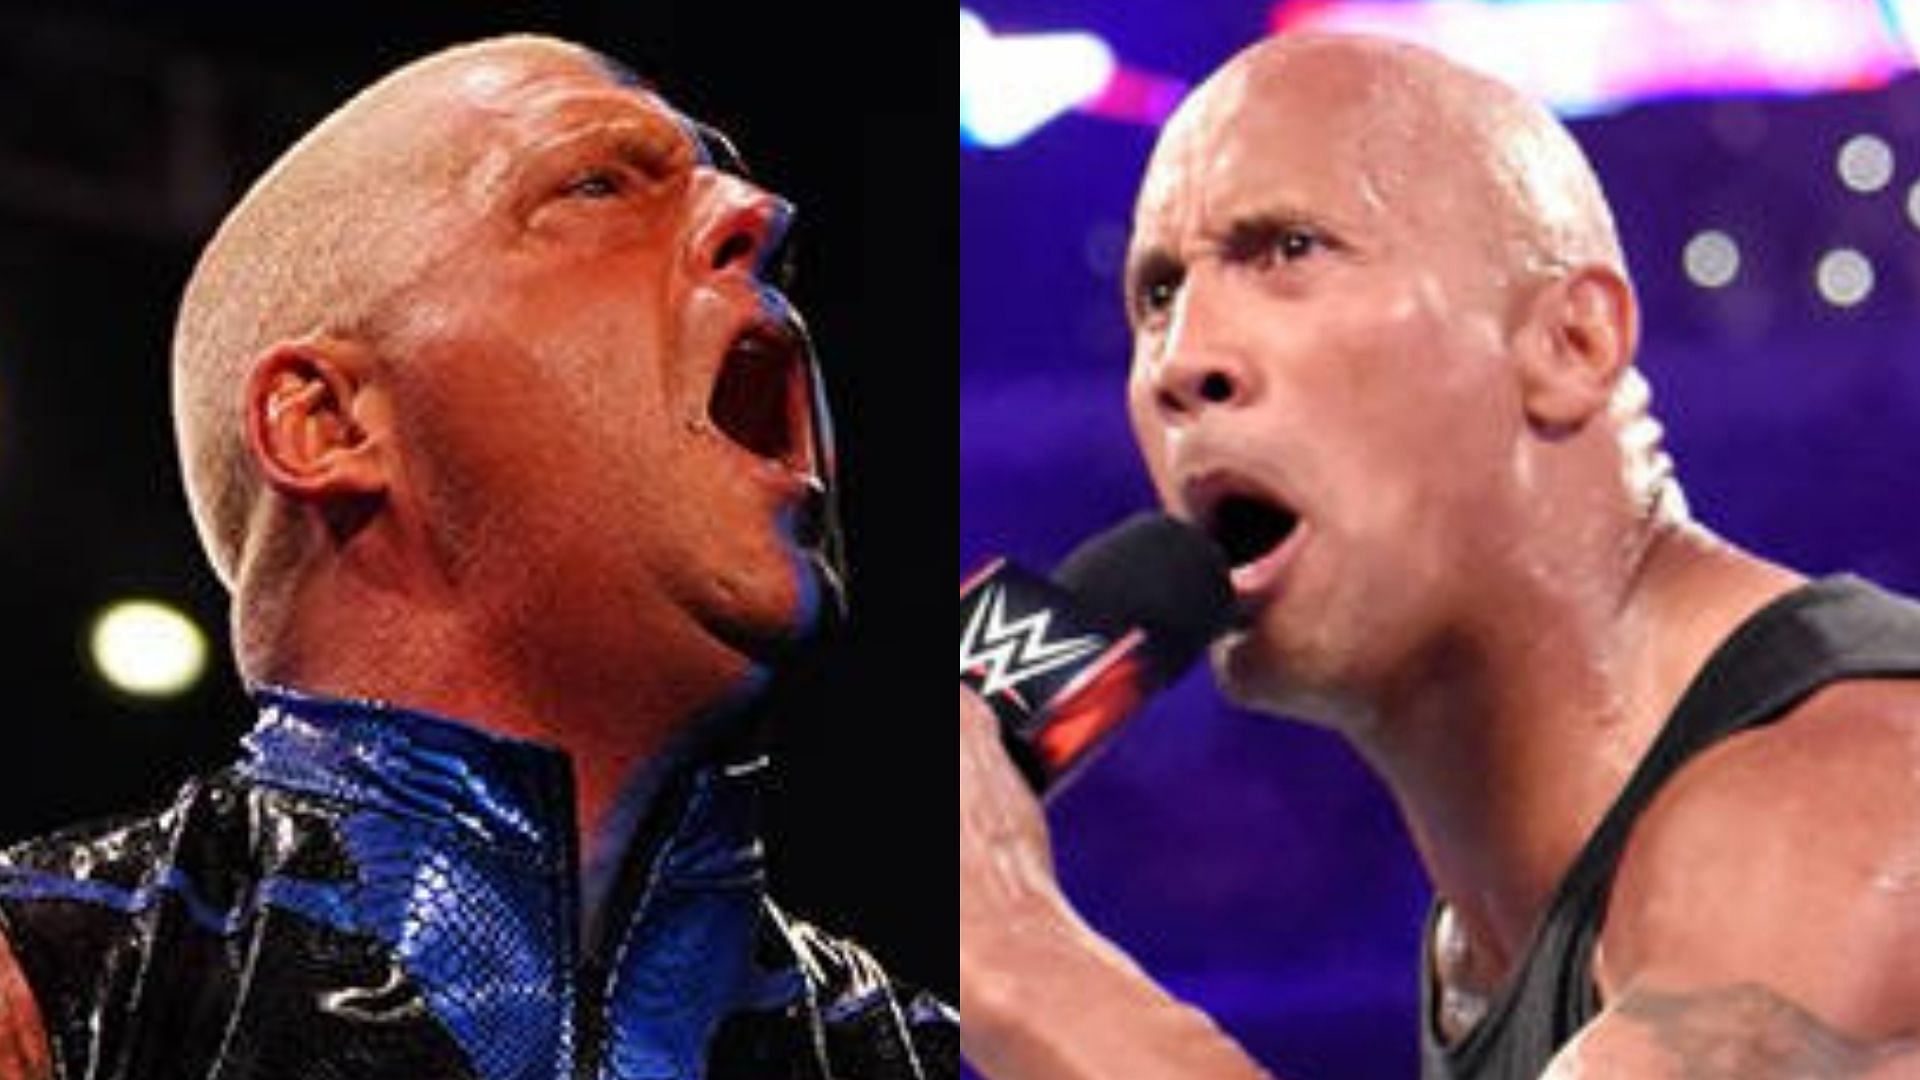 Which star does Dustin Rhodes think is the future of AEW?